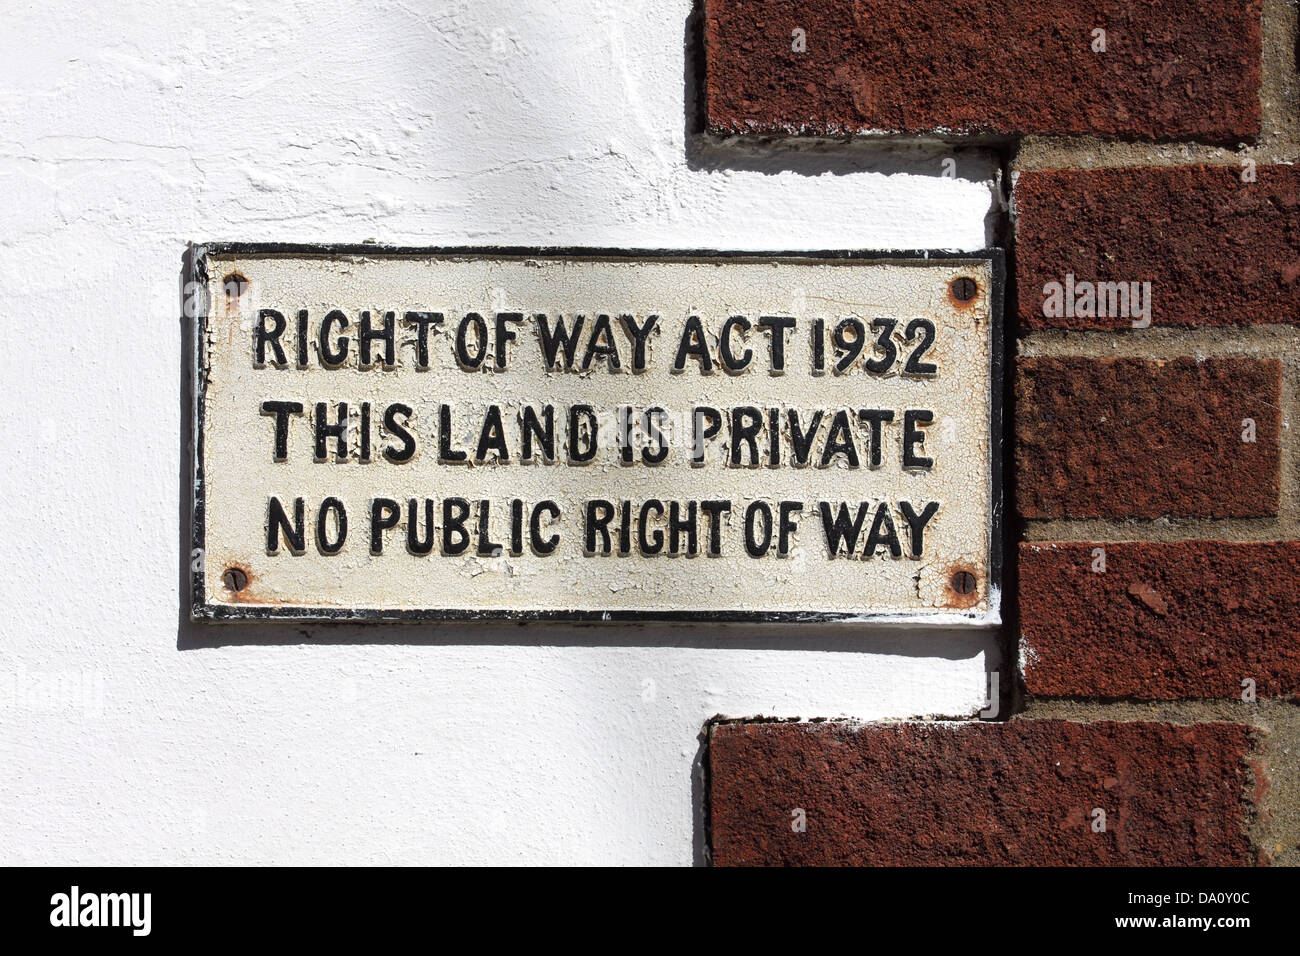 'Right of Way Act 1932' sign in a laneway, Swaffham, England Stock Photo